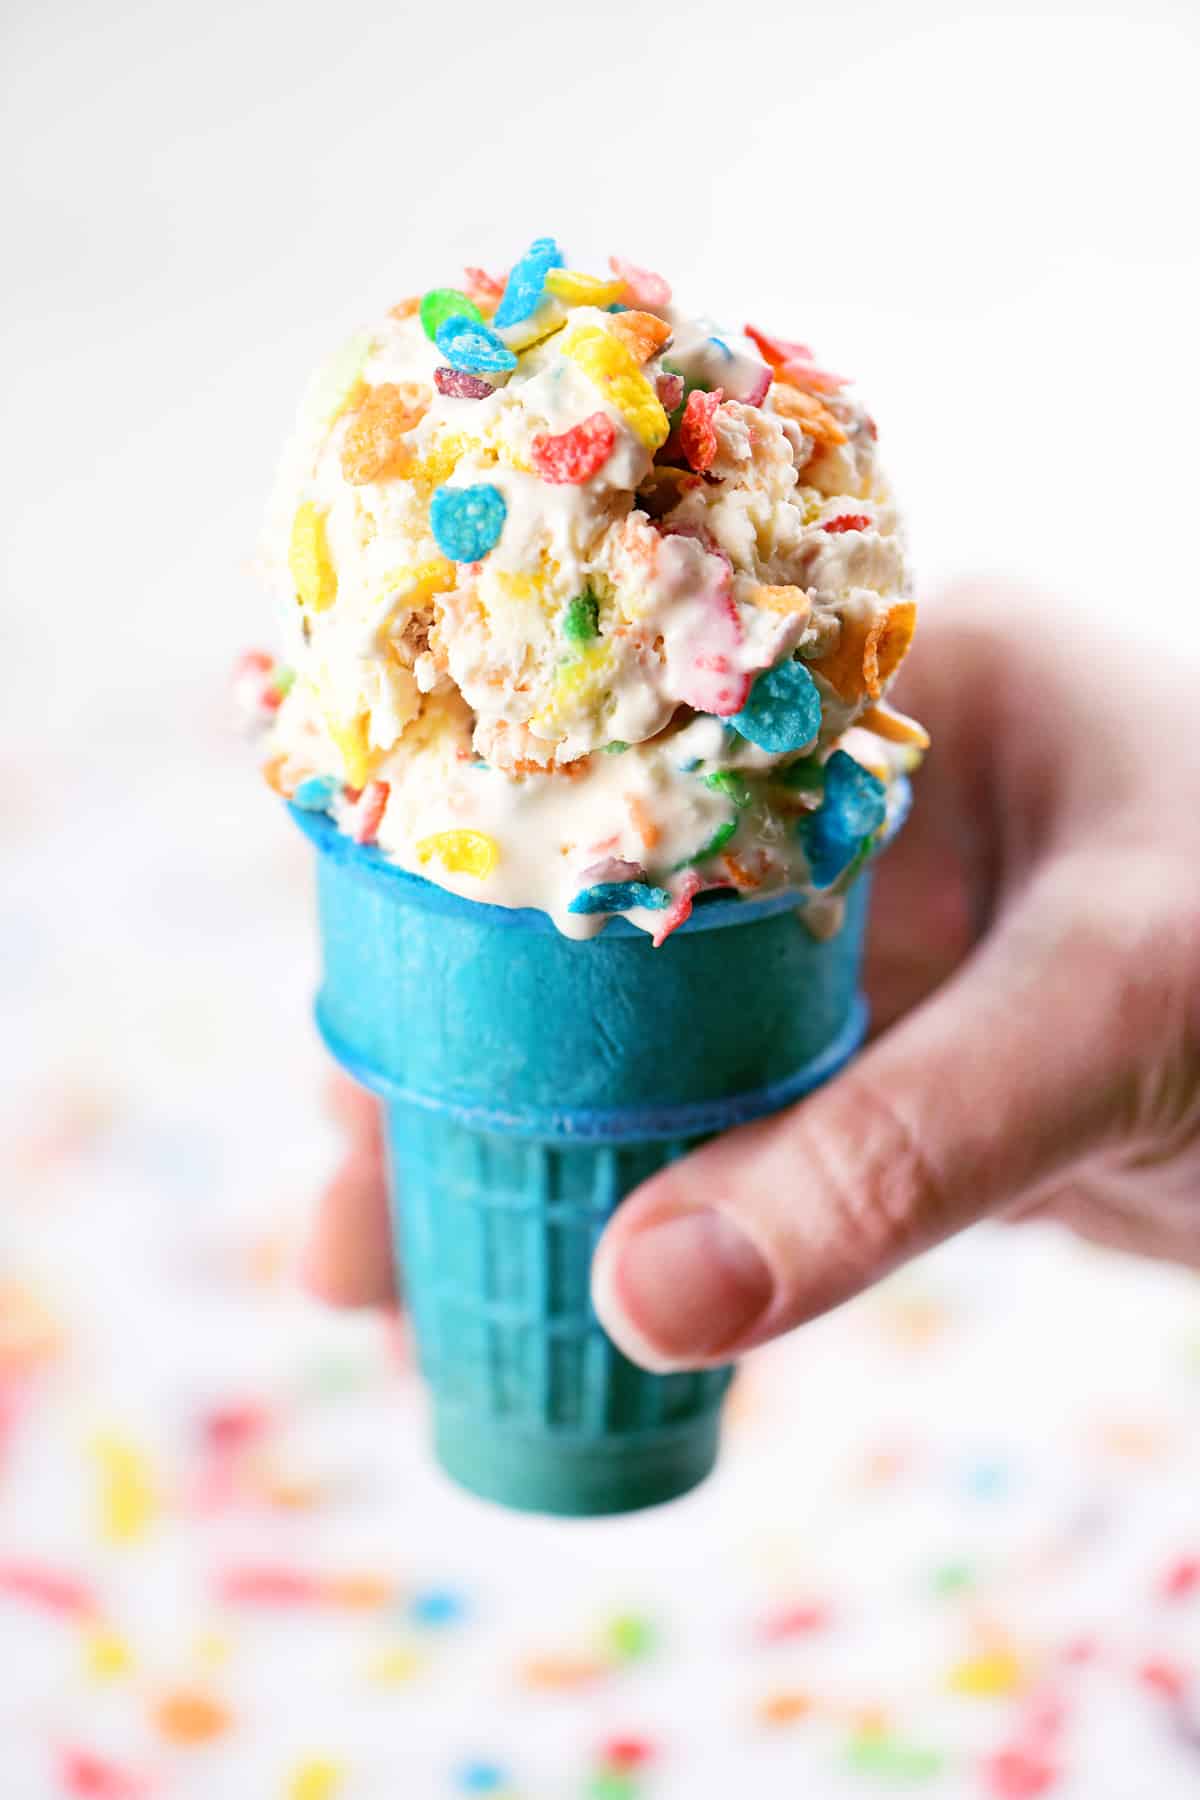 A blue cone with scoops of Fruity Pebbles Ice Cream inside.